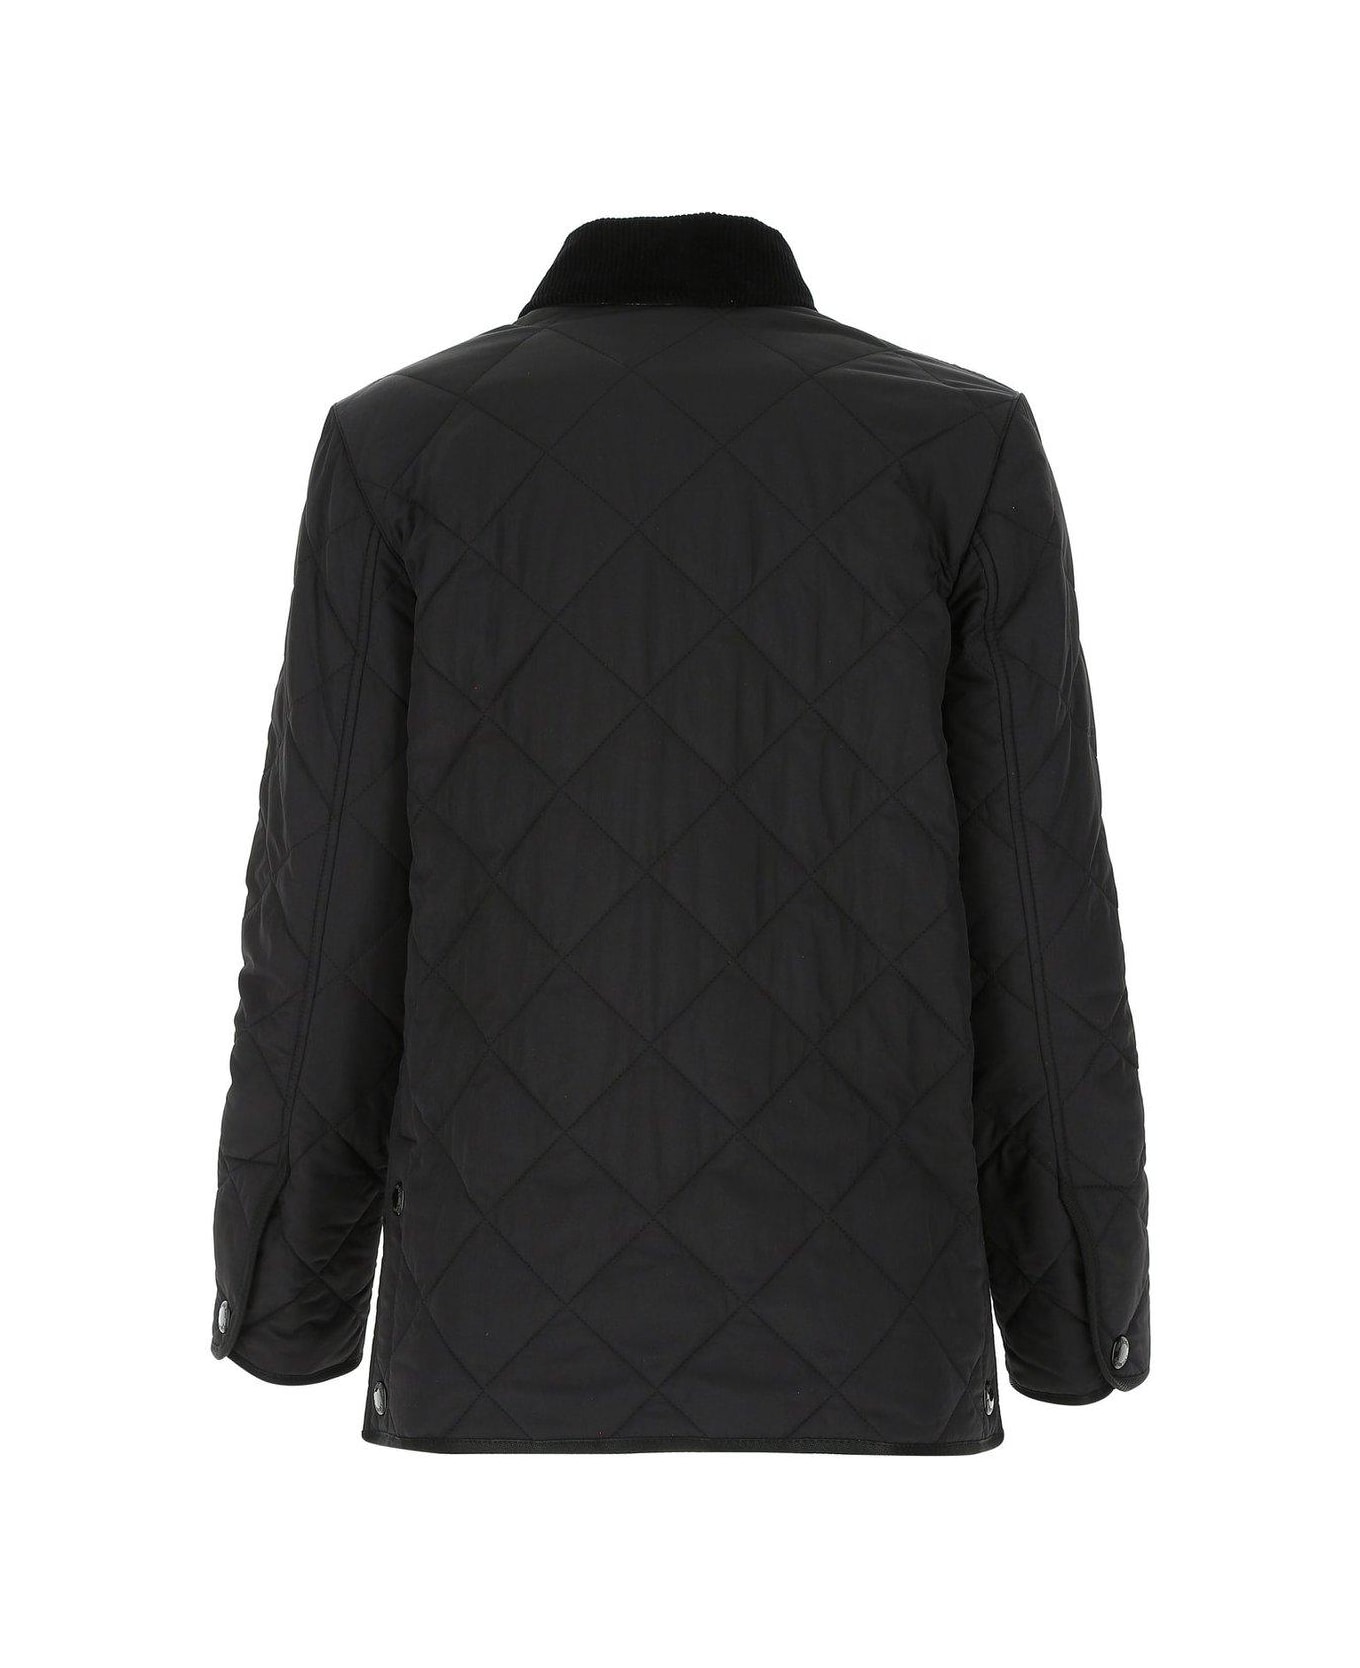 Burberry Quilted Jacket 'country' - Black